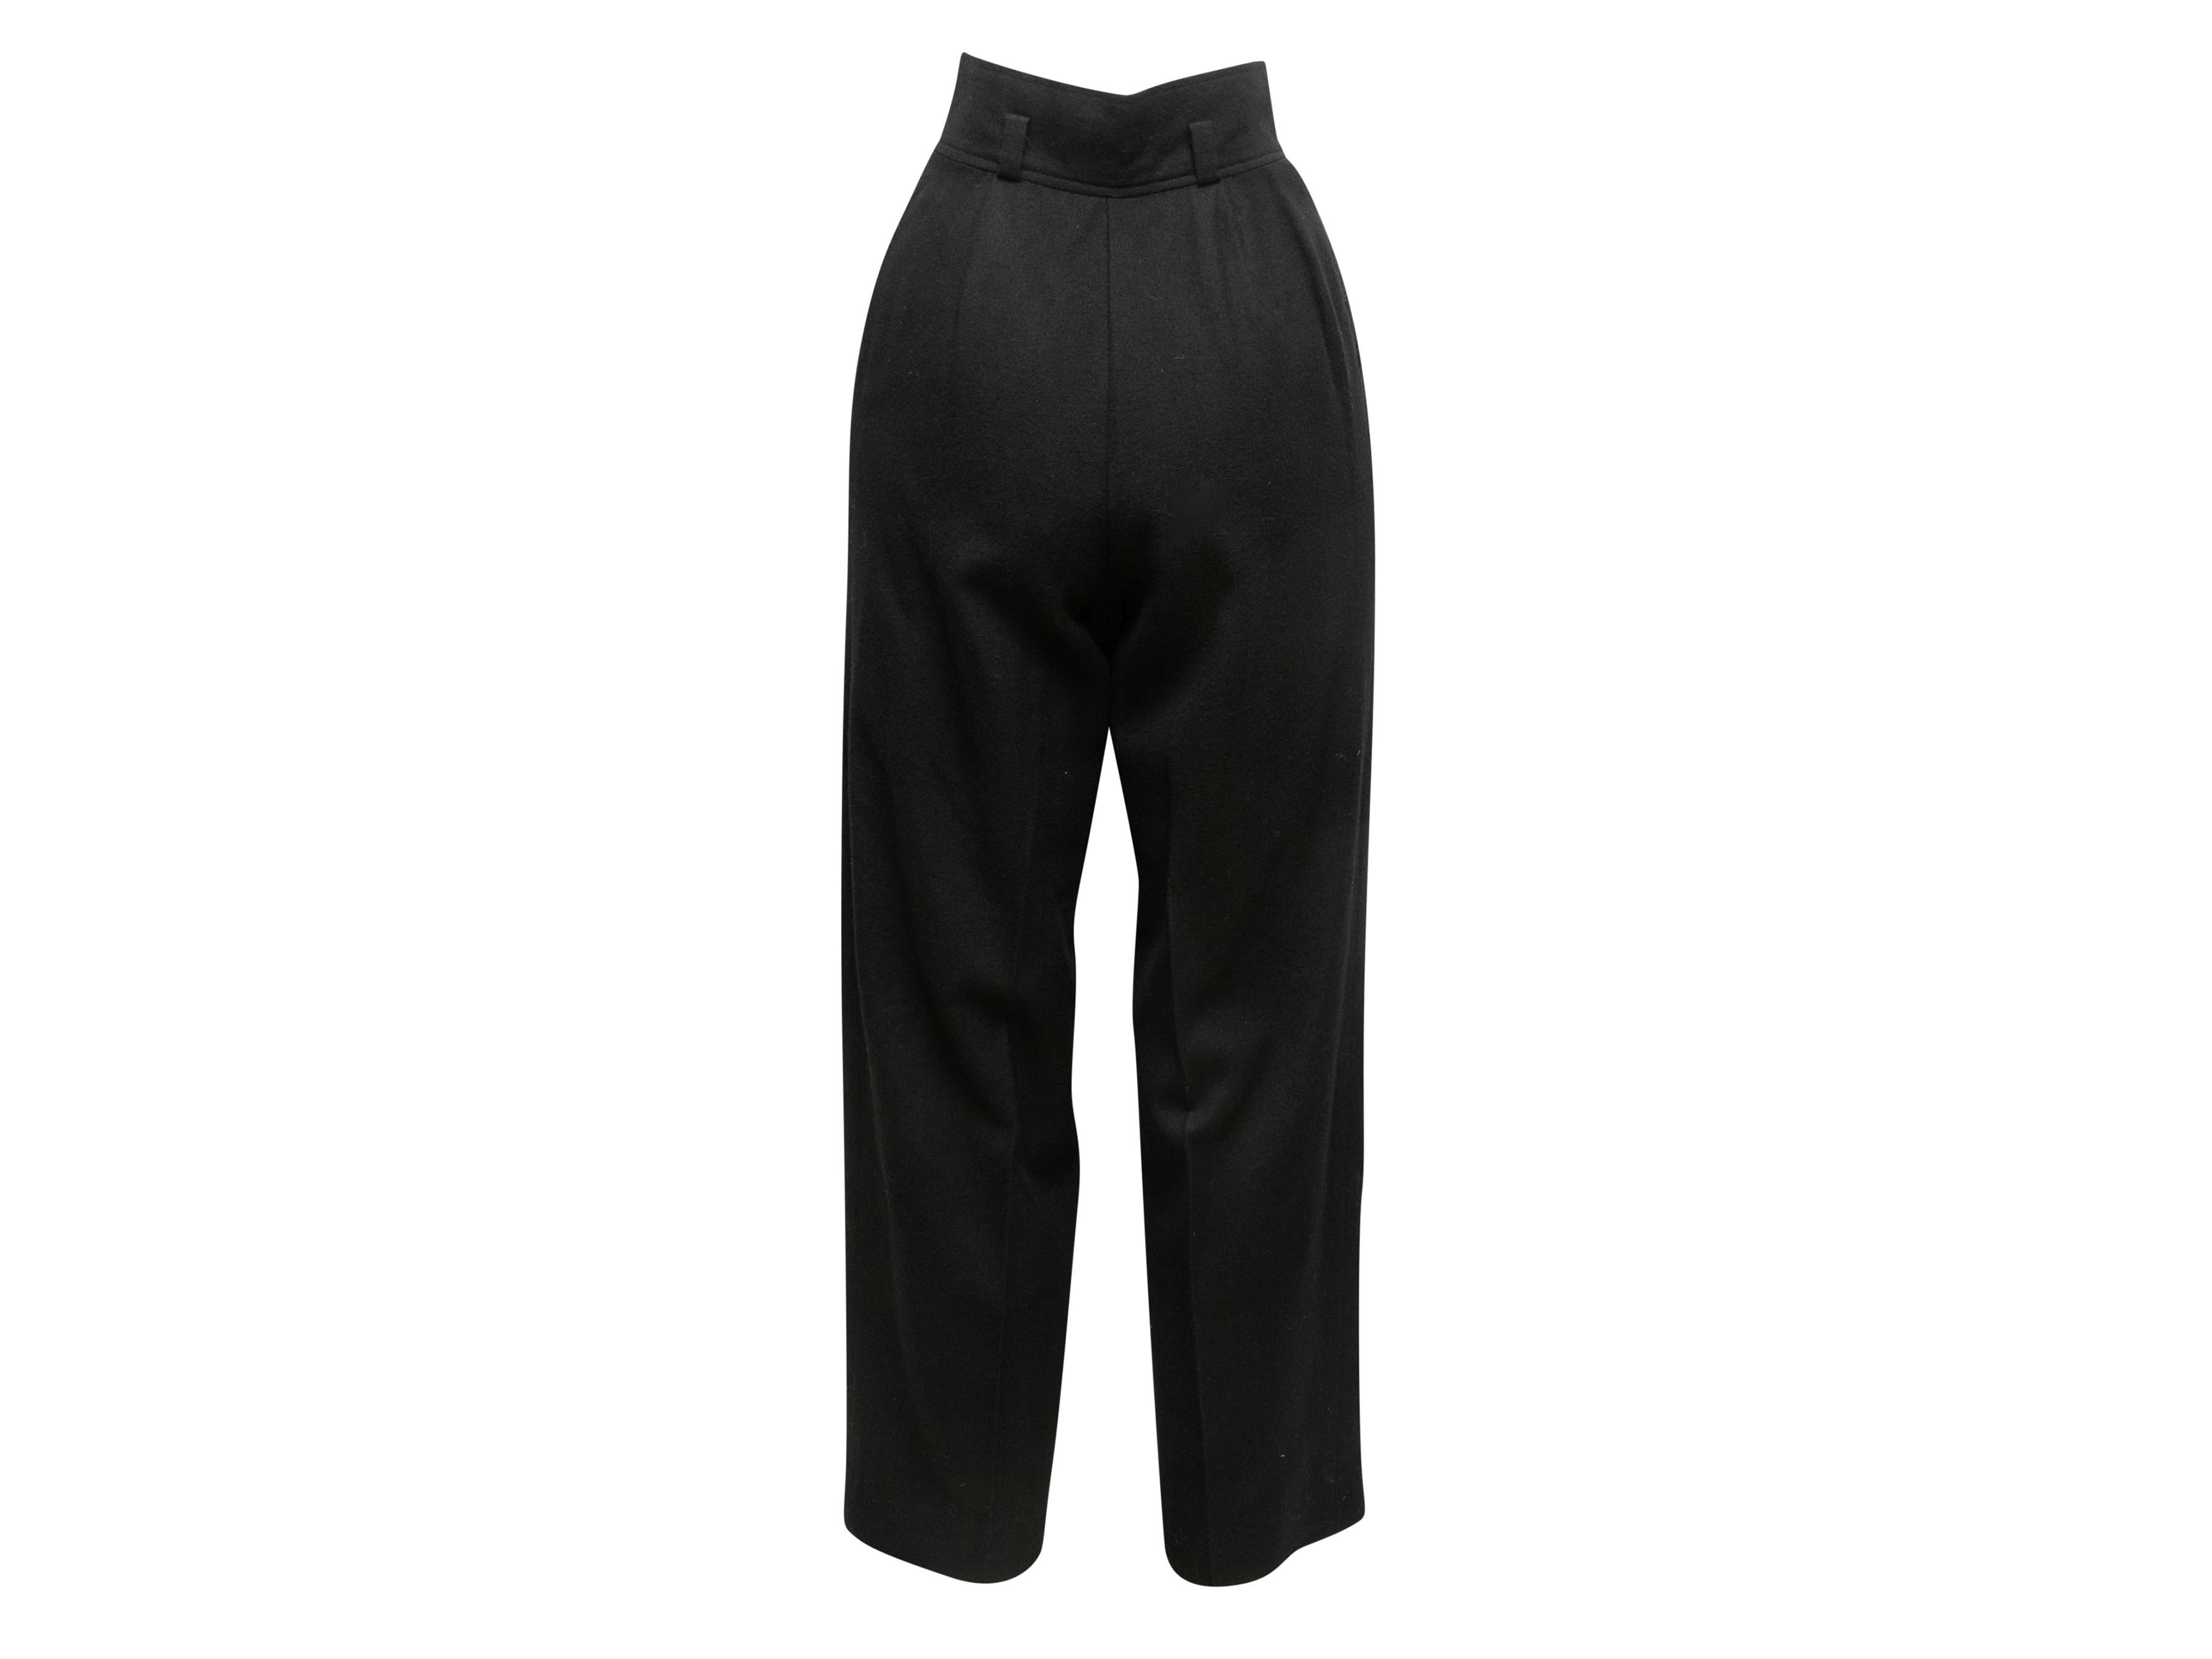 Vintage Black Chanel Boutique Wool Trousers Size US XS In Good Condition For Sale In New York, NY